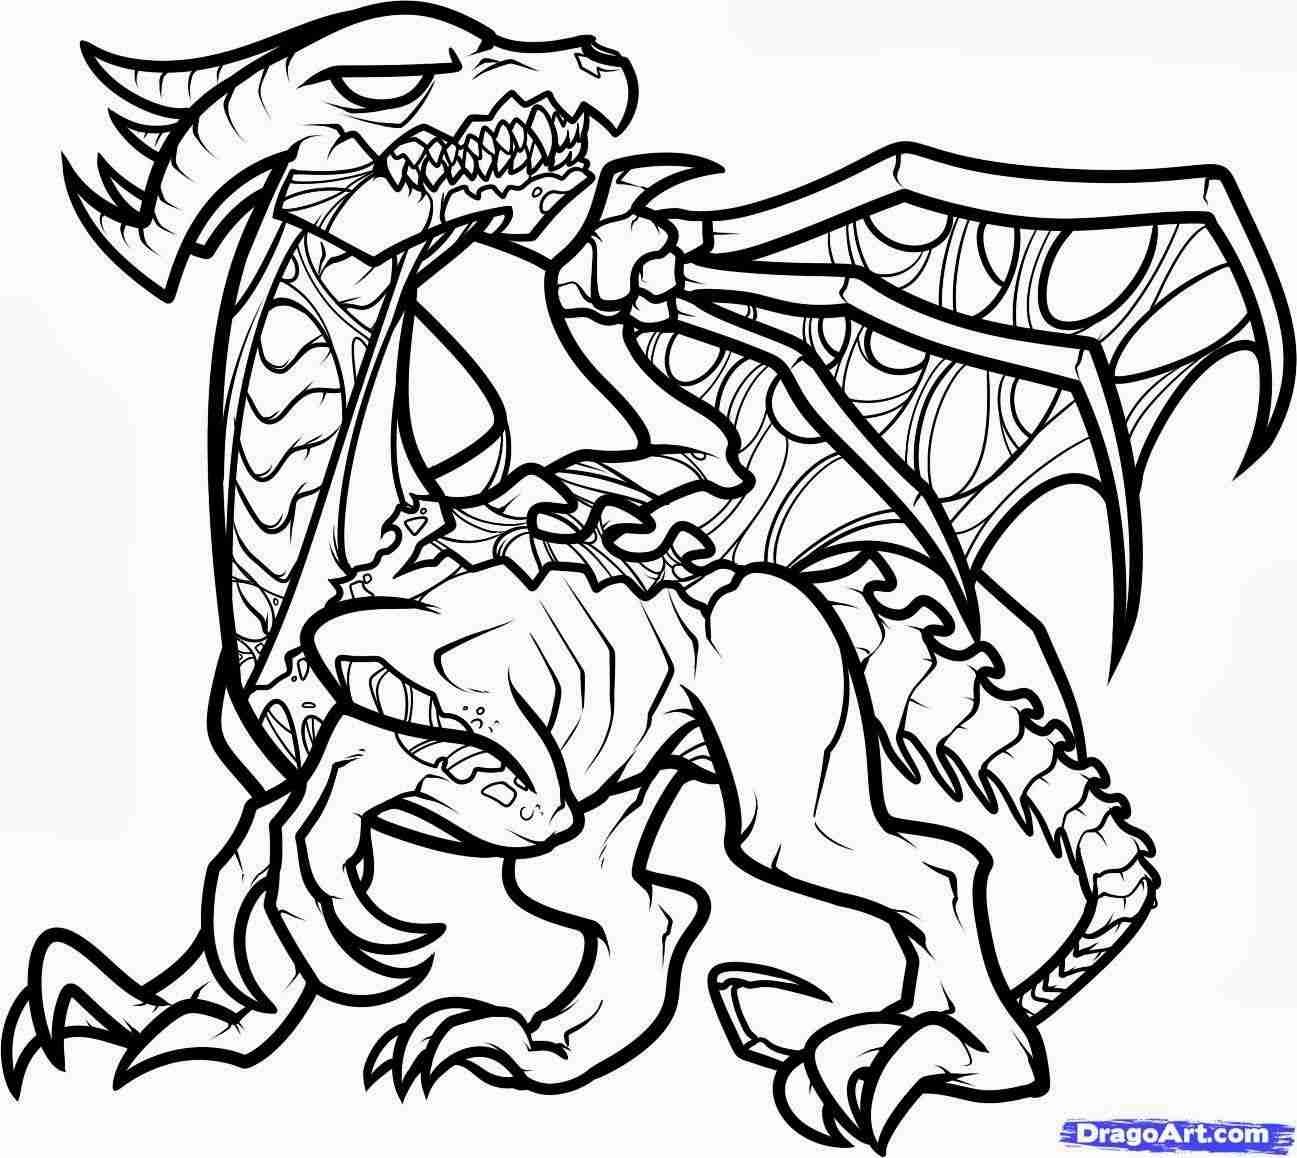 ender dragon minecraft coloring pages